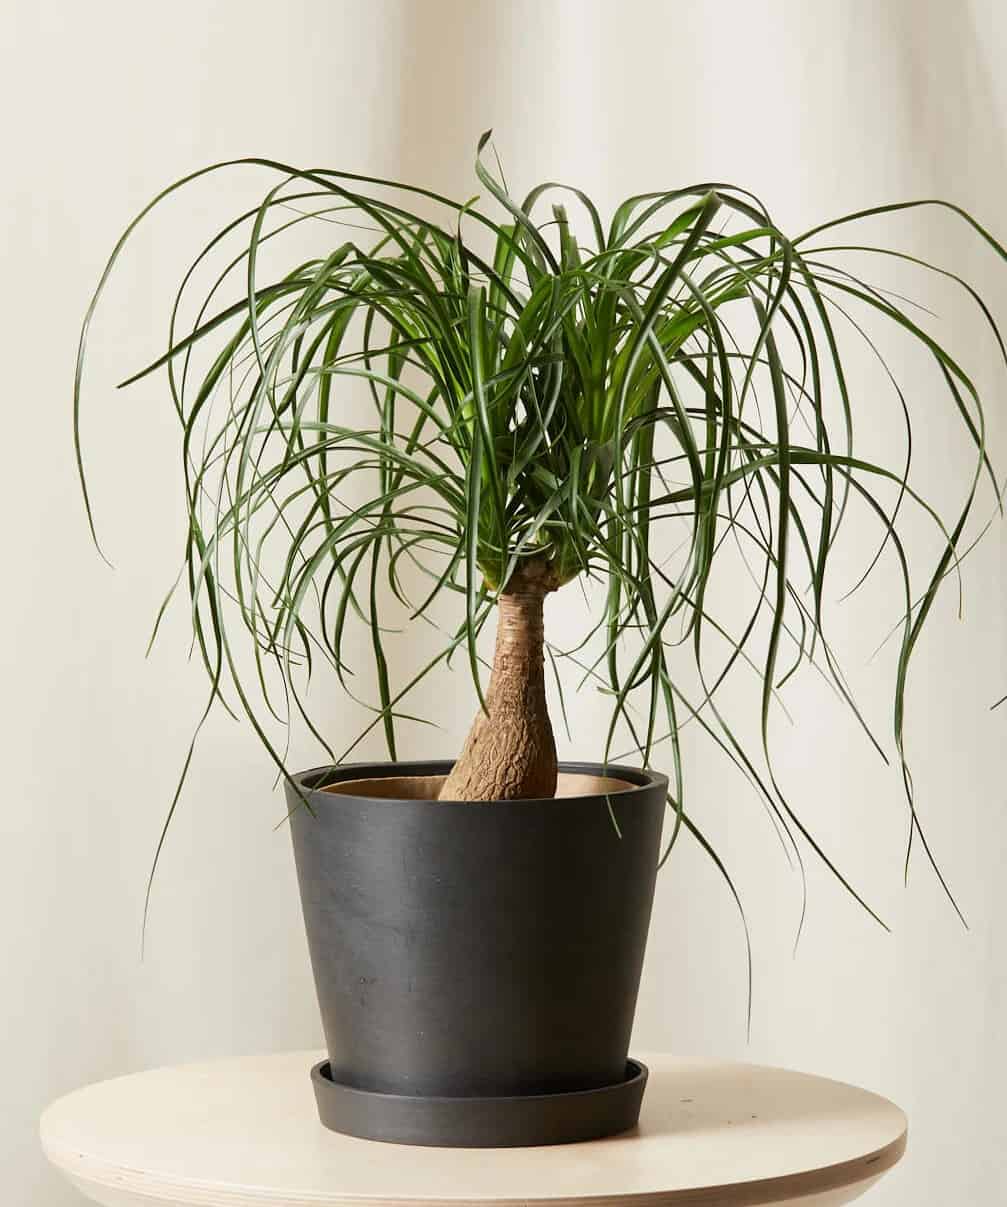 Go For a Coastal Look With a Ponytail Palm